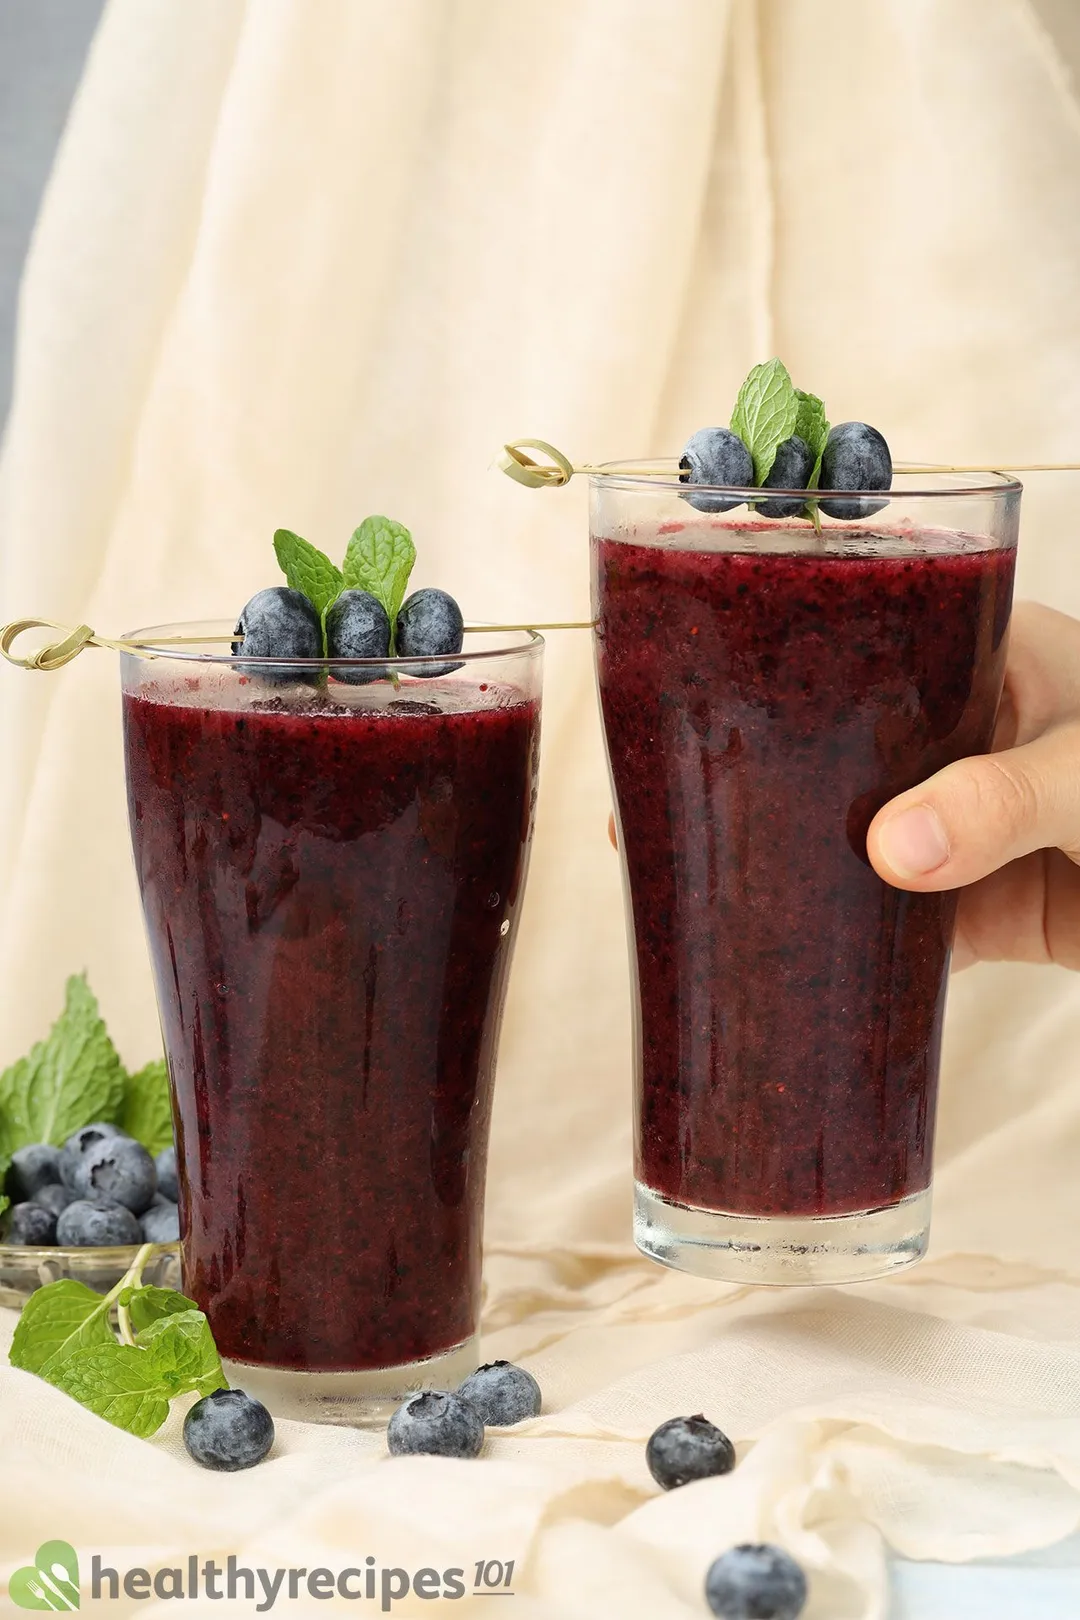 A hand picking up a glass of blueberry smoothie placed next to another identical glass and near some blueberries.